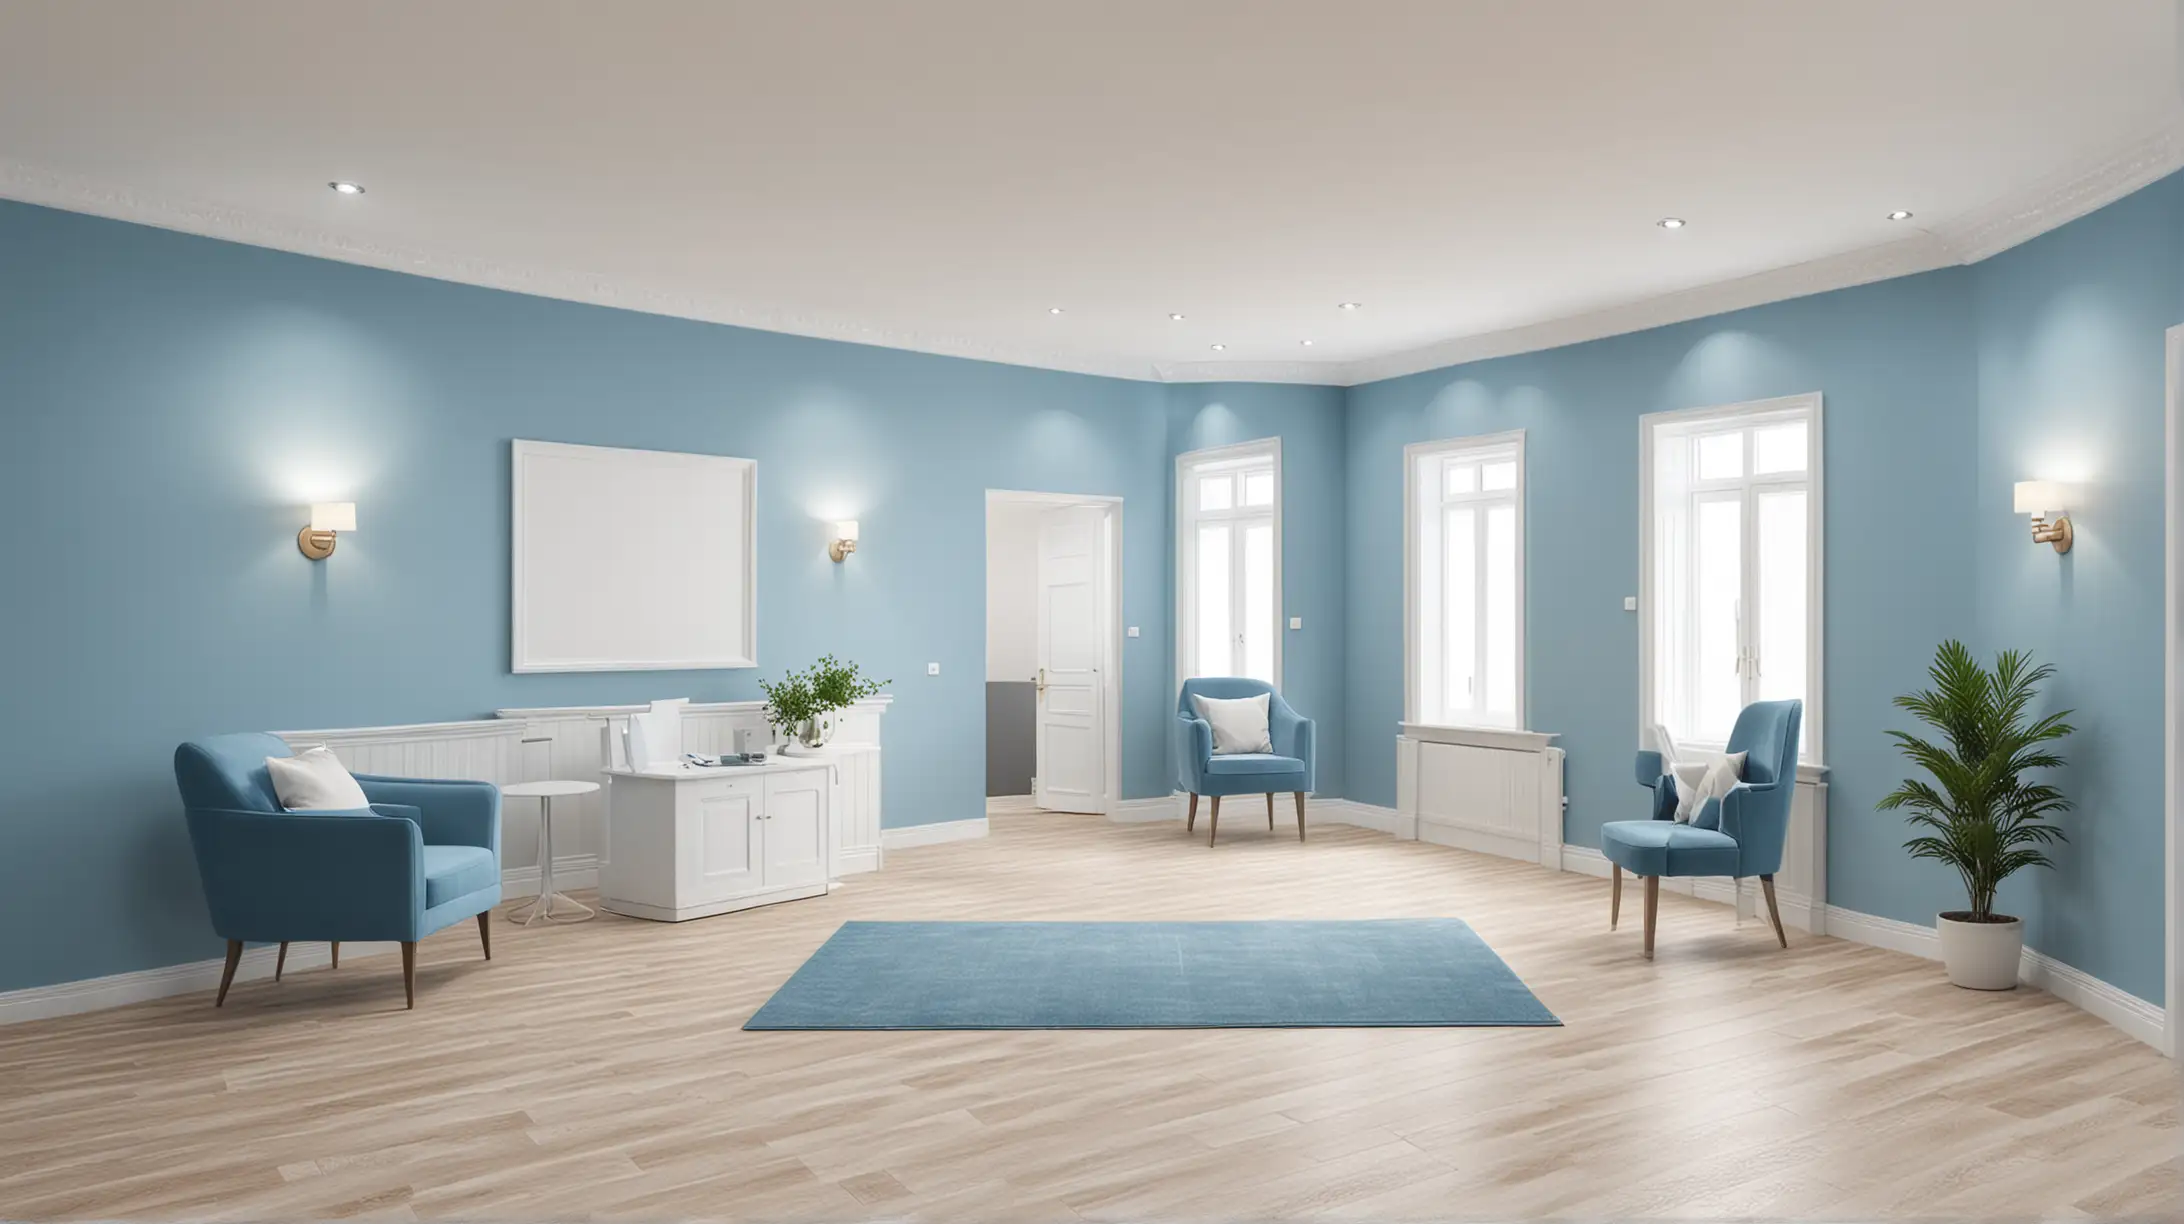 Elderly Care Home Reception Area Presentation Set in Serene Whites and Blues